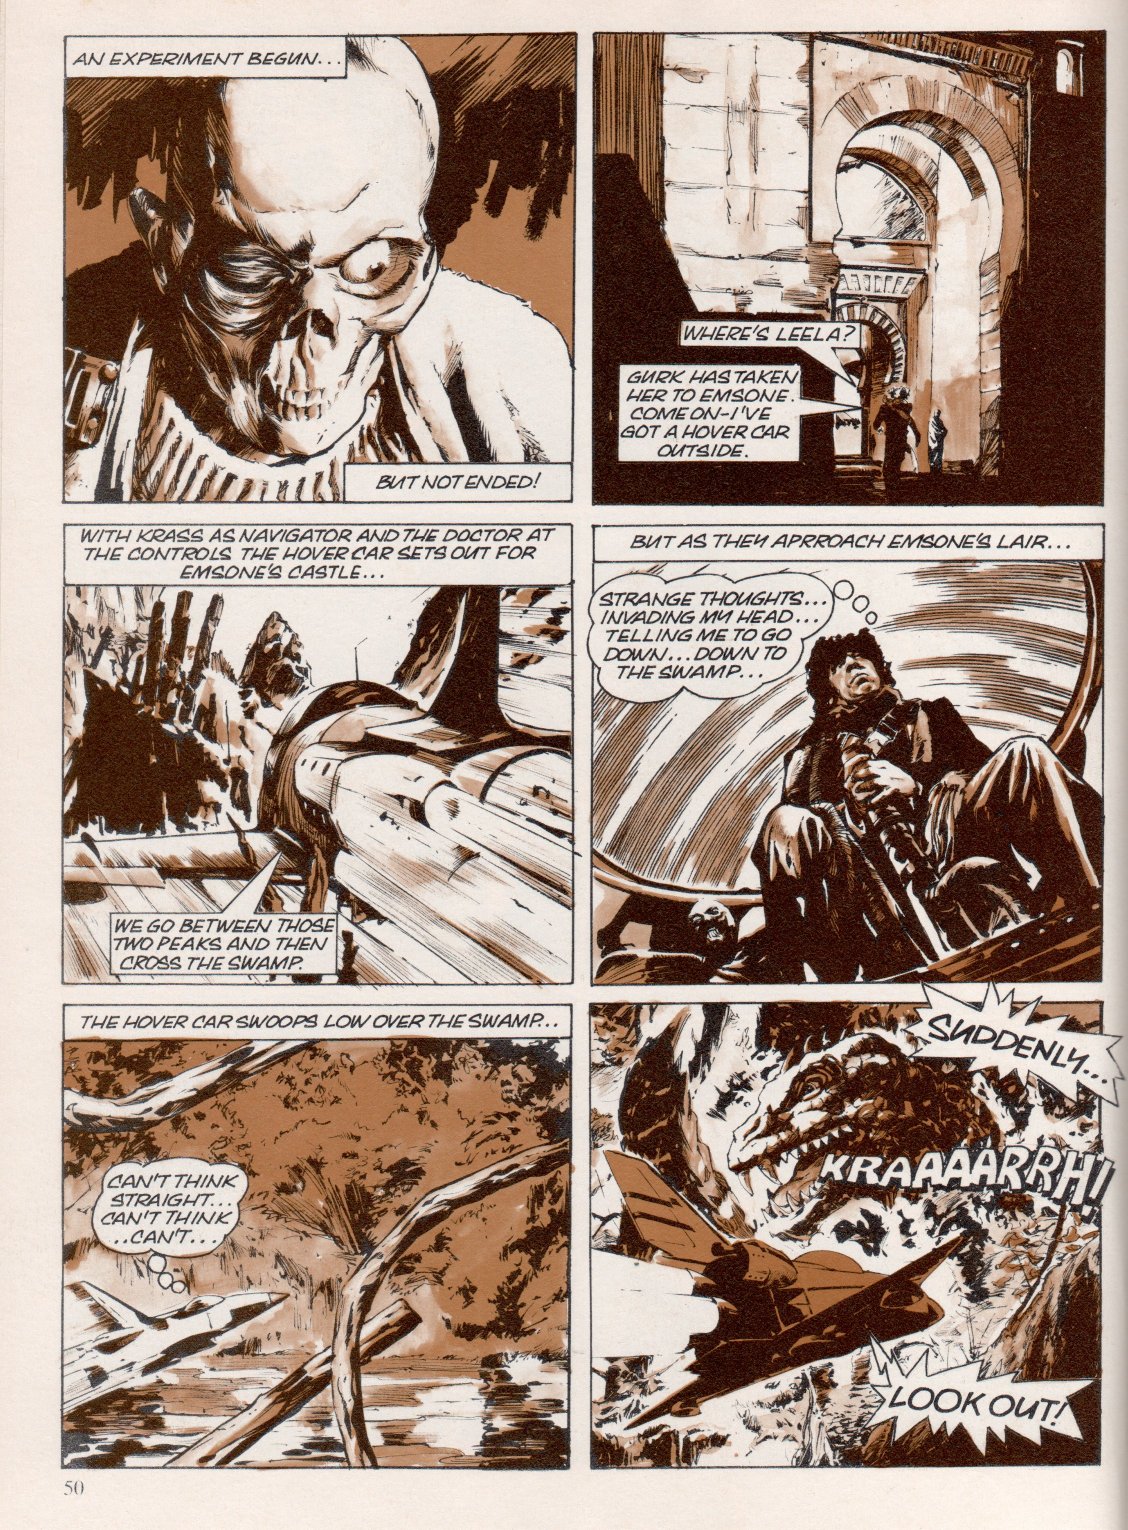 Doctor Who Annual issue 1979 - Page 51